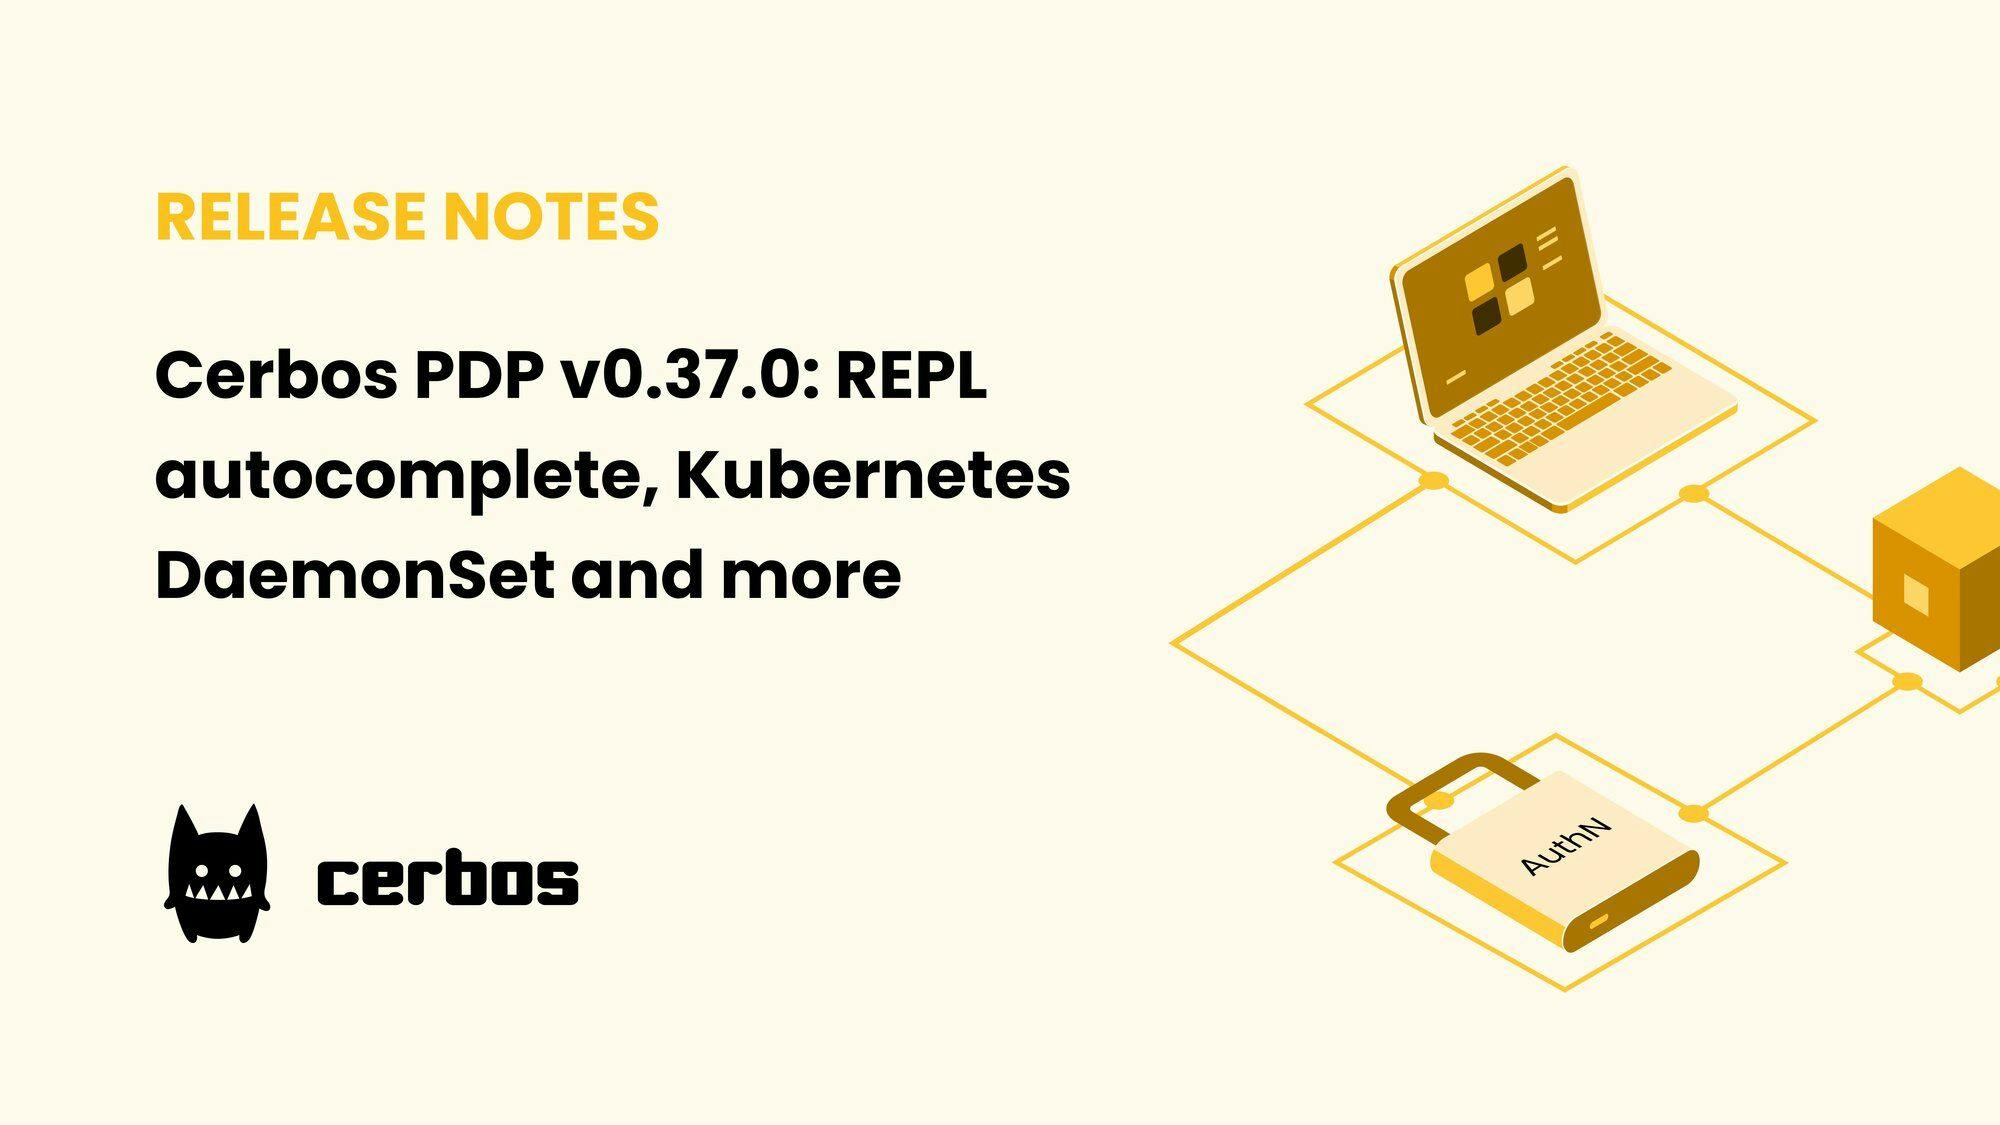 Cerbos PDP v0.37.0 Release Highlights: REPL autocomplete, Kubernetes DaemonSet and more